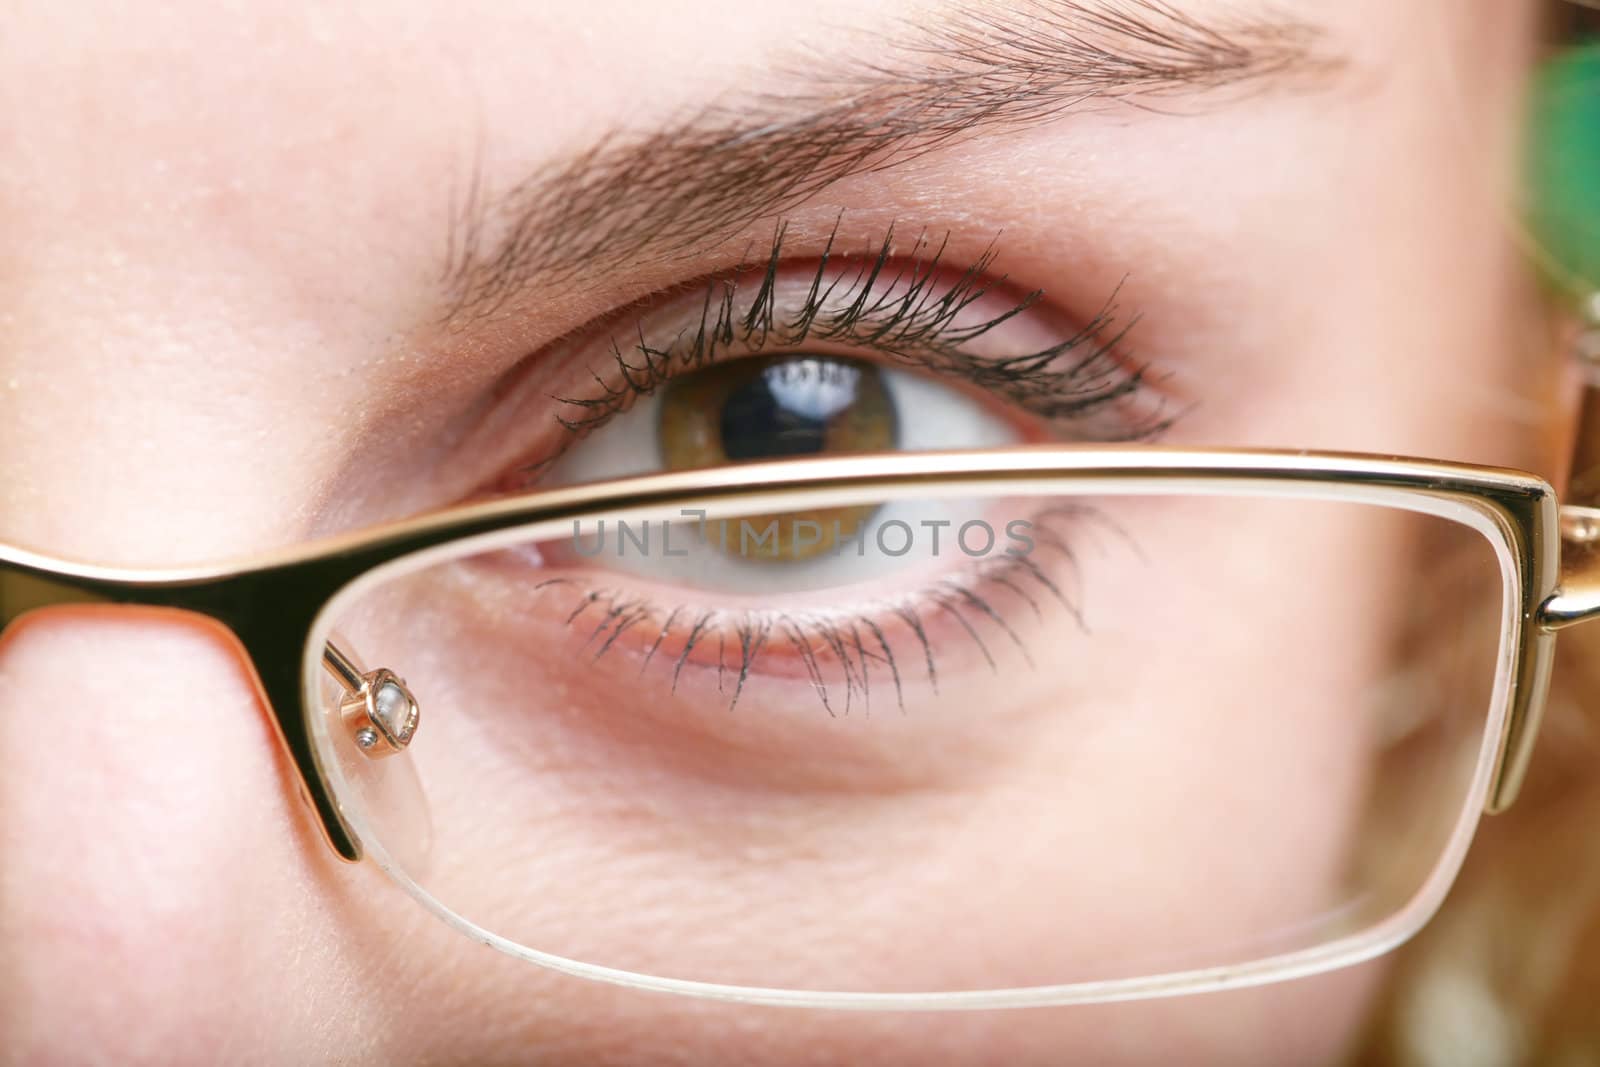 An image of a brown eye in glasses